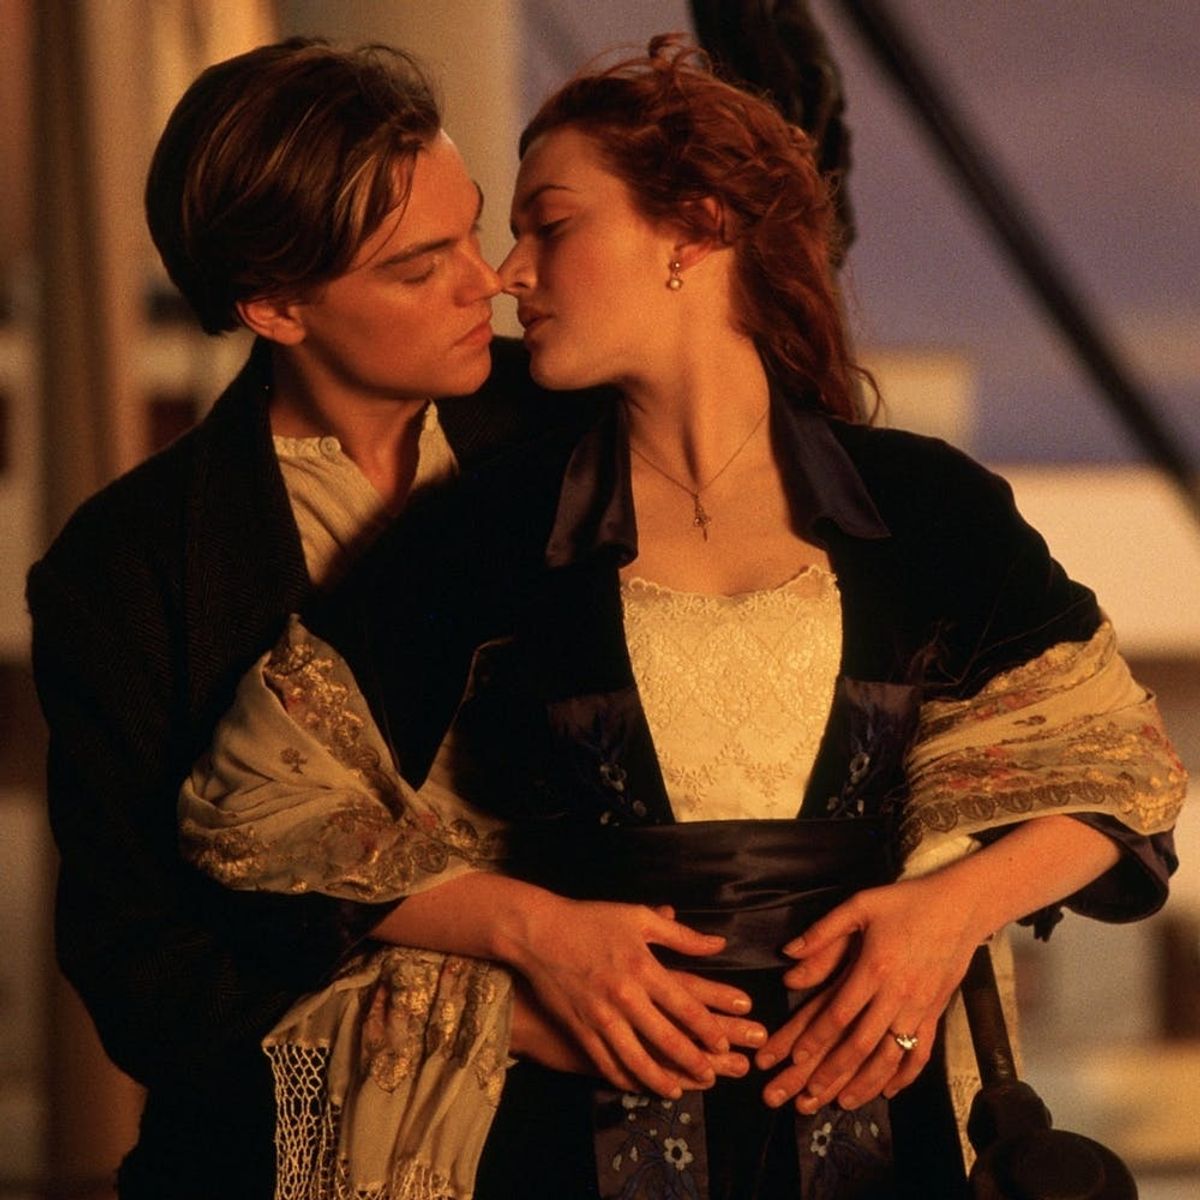 OMG: “Titanic” Is Coming Back to Theaters in December